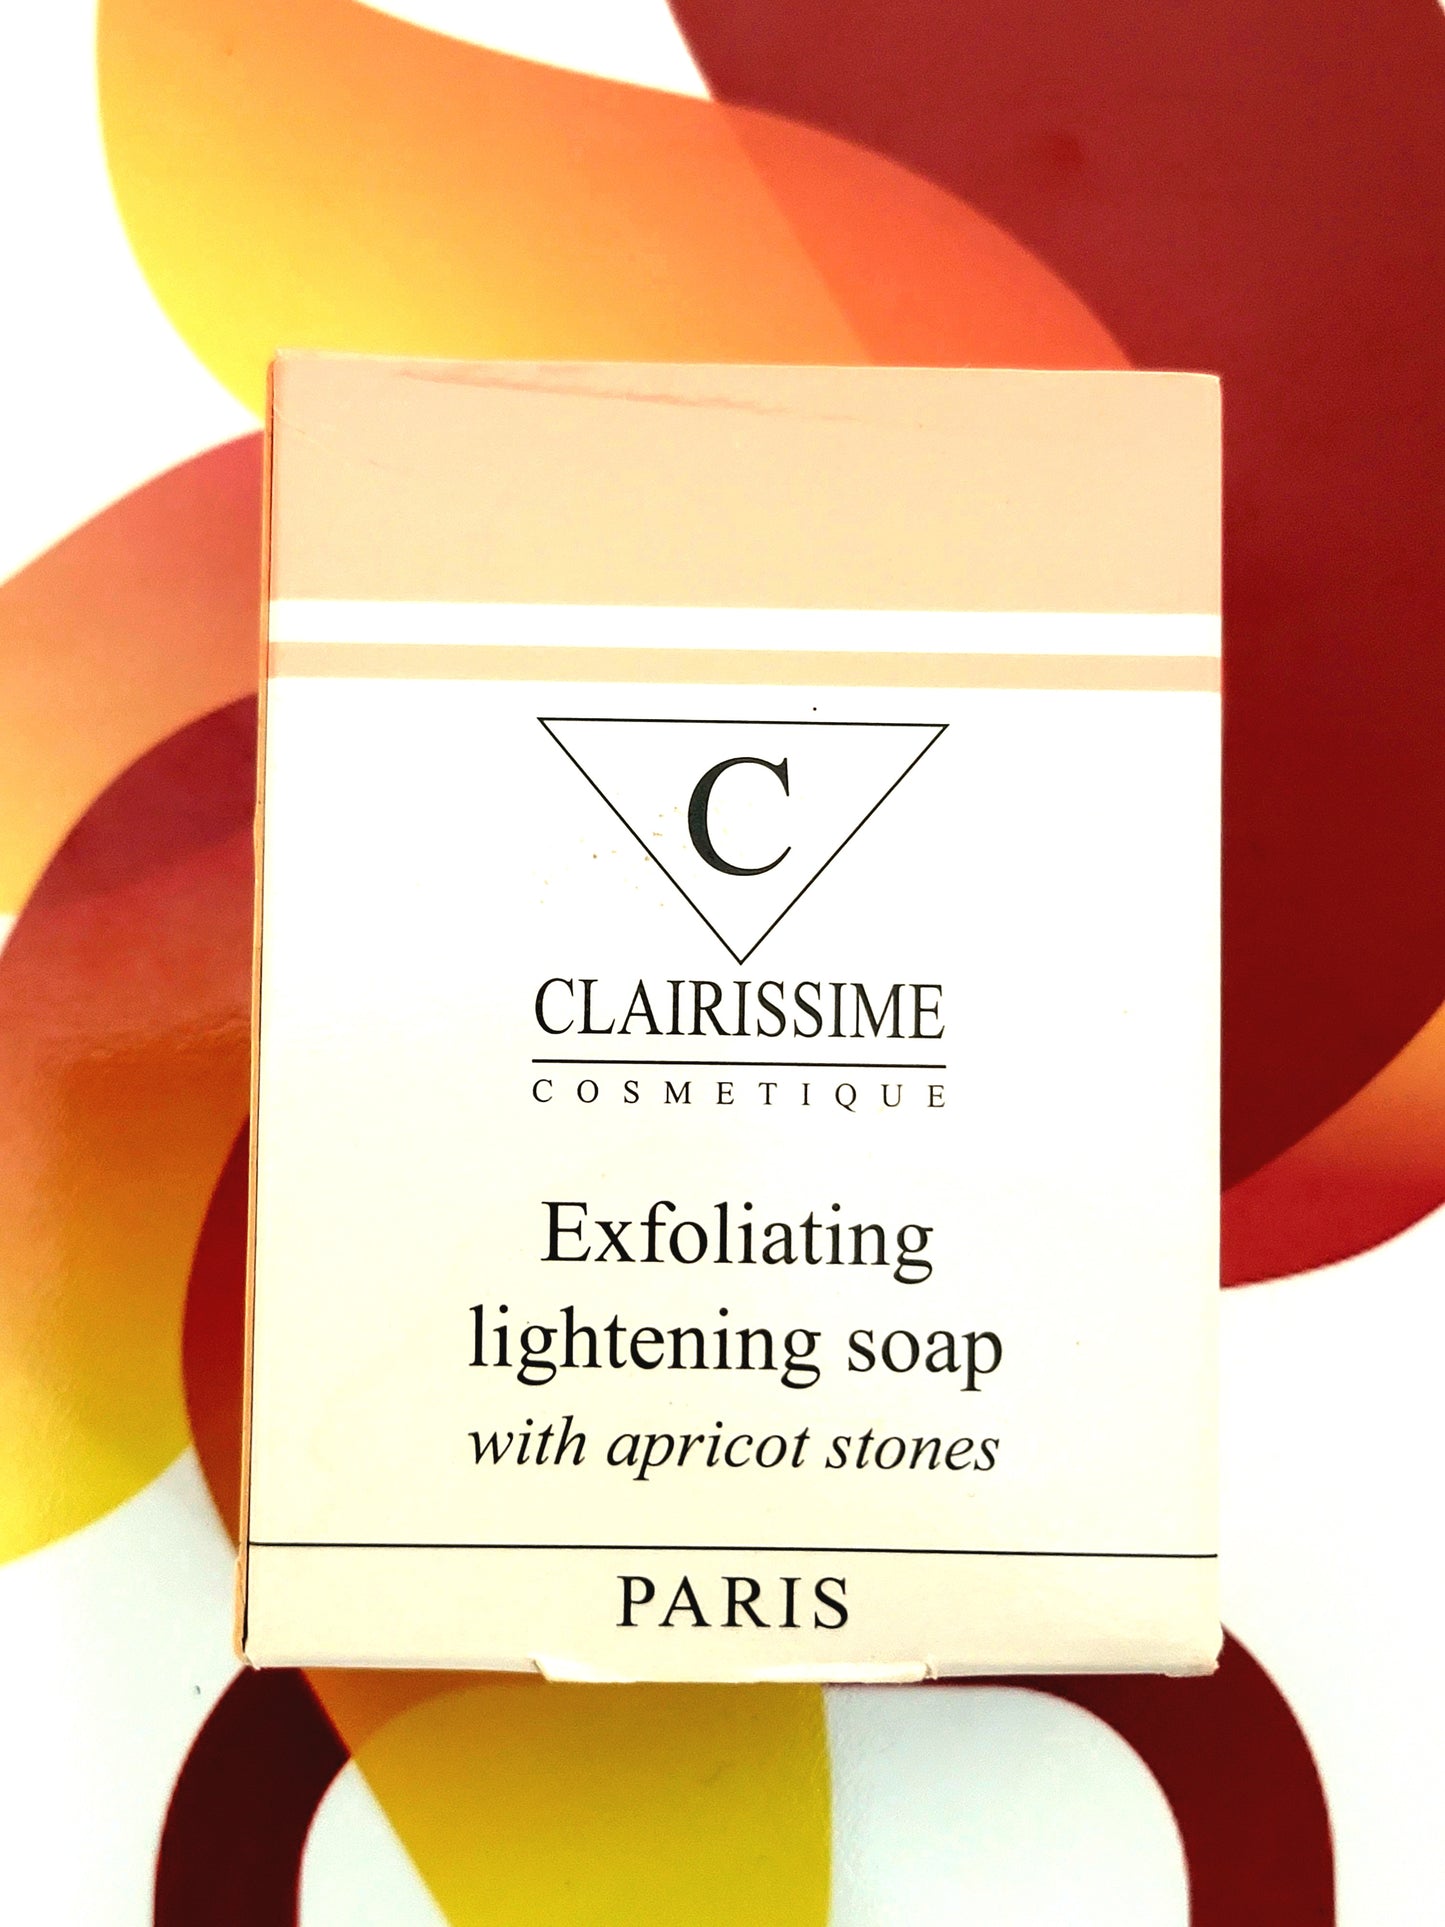 Clairissime Exfoliating Lightening Soap with Apricot Stones 200g